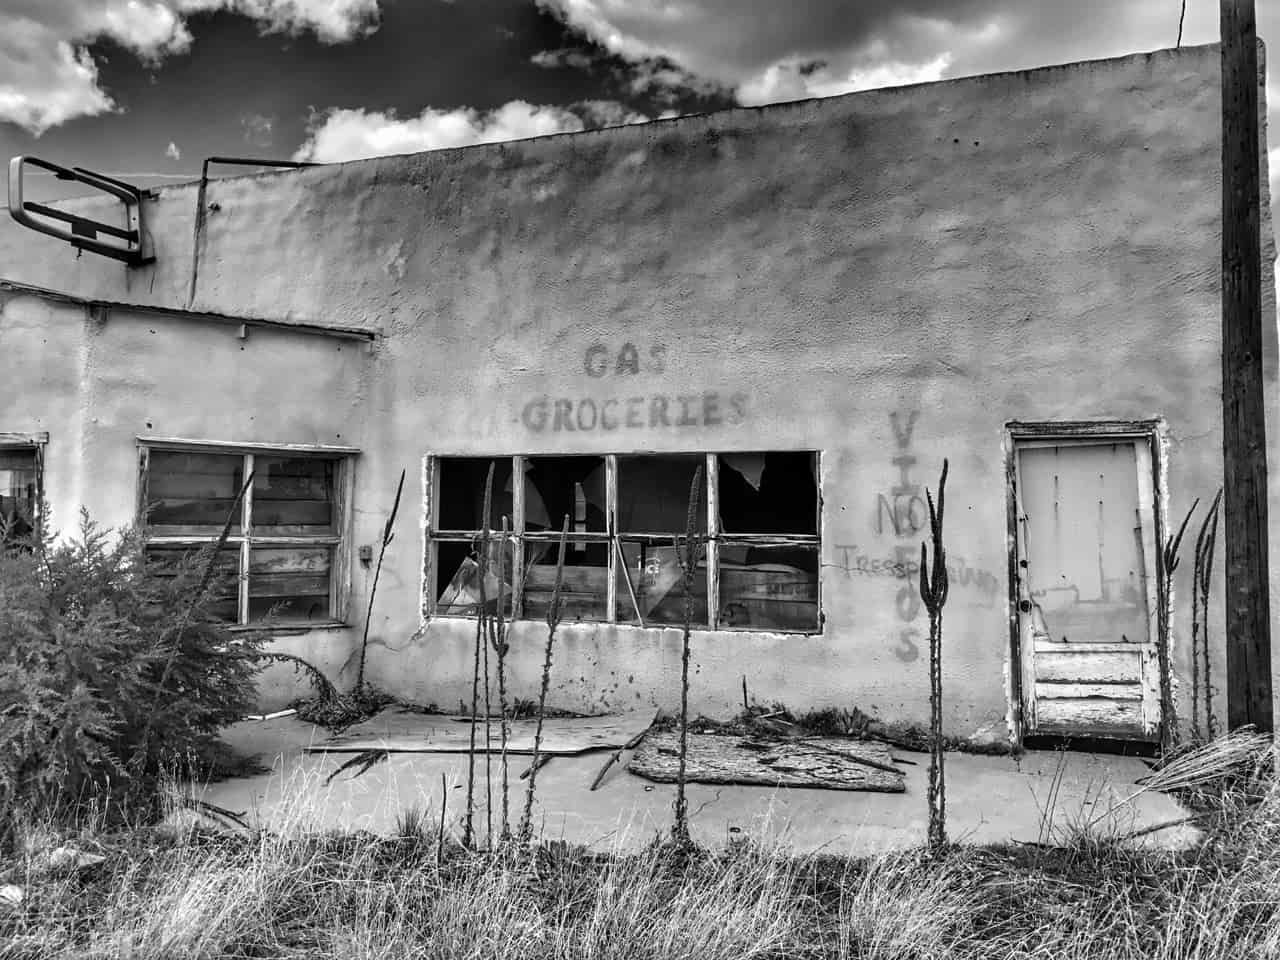 _images/abadoned_gas_station_pie_town_nm.jpg